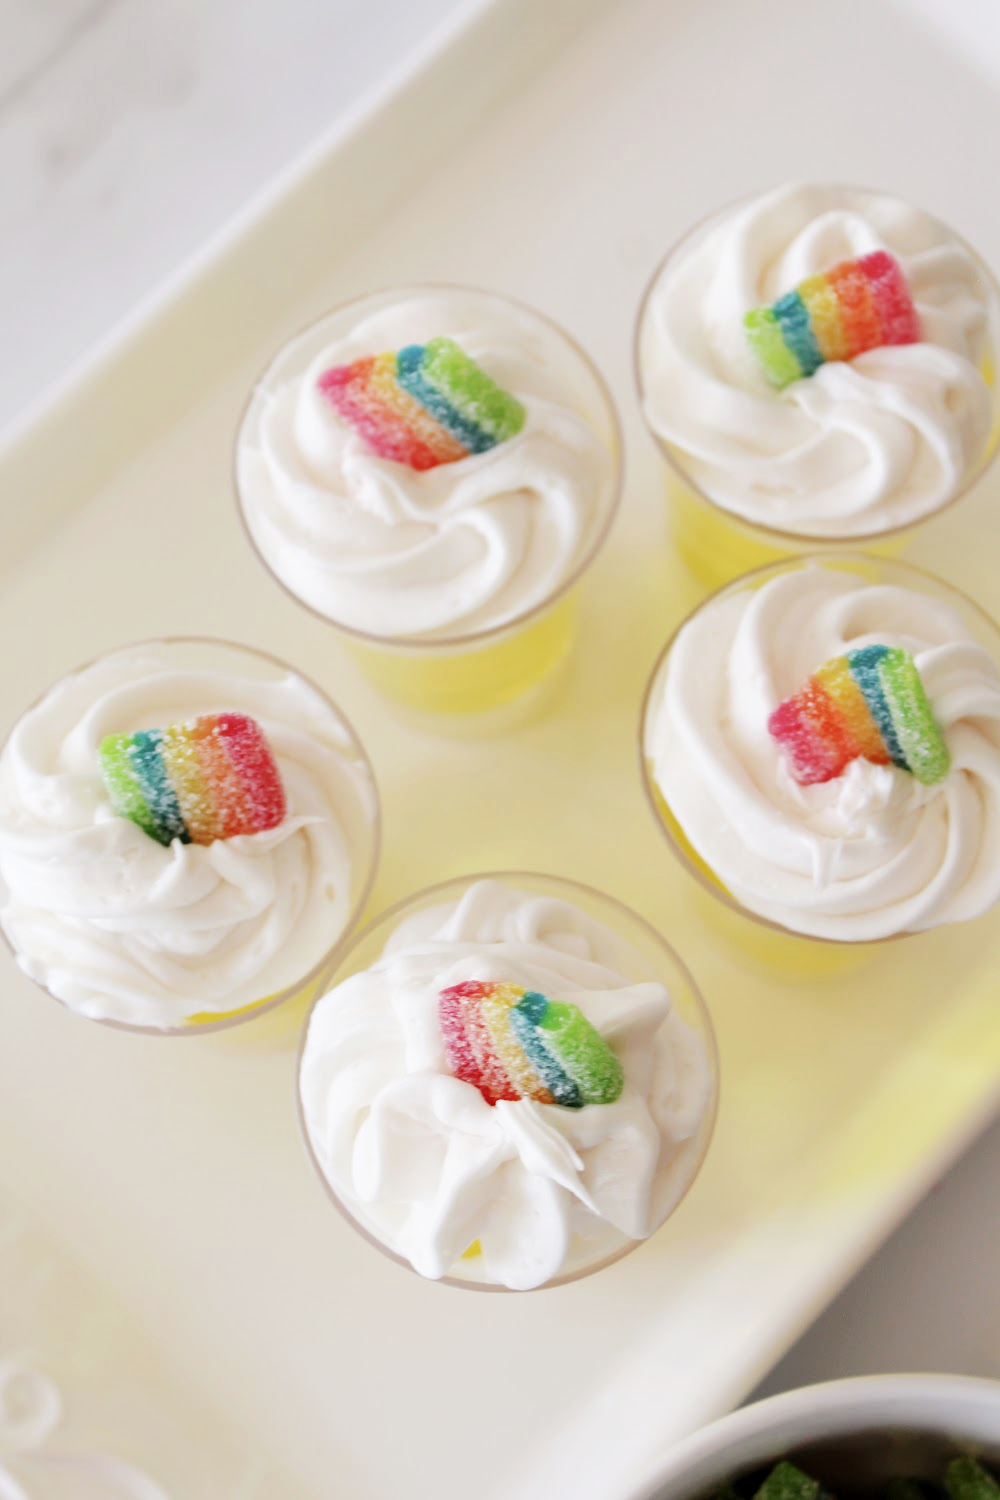 St. Patrick's Day jello shots topped with whipped cream and decorated with rainbow candy on top. Sitting on a white serving tray.